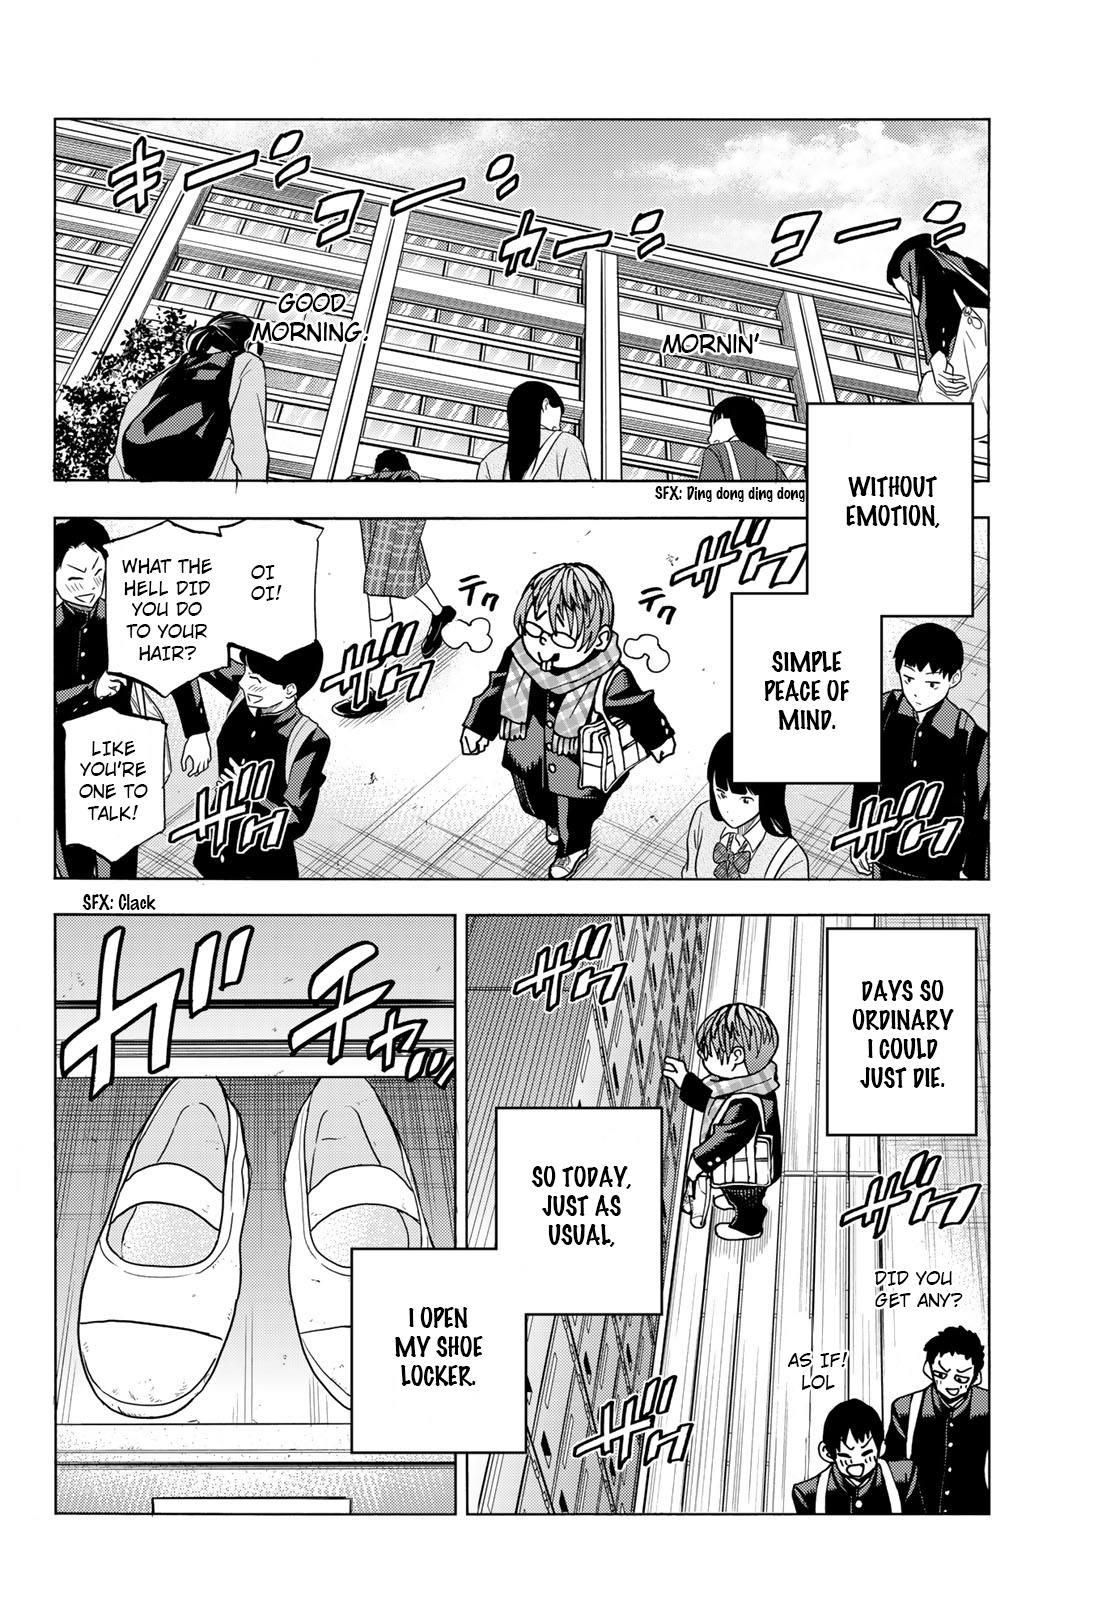 The Story Between A Dumb Prefect And A High School Girl With An Inappropriate Skirt Length - Page 2